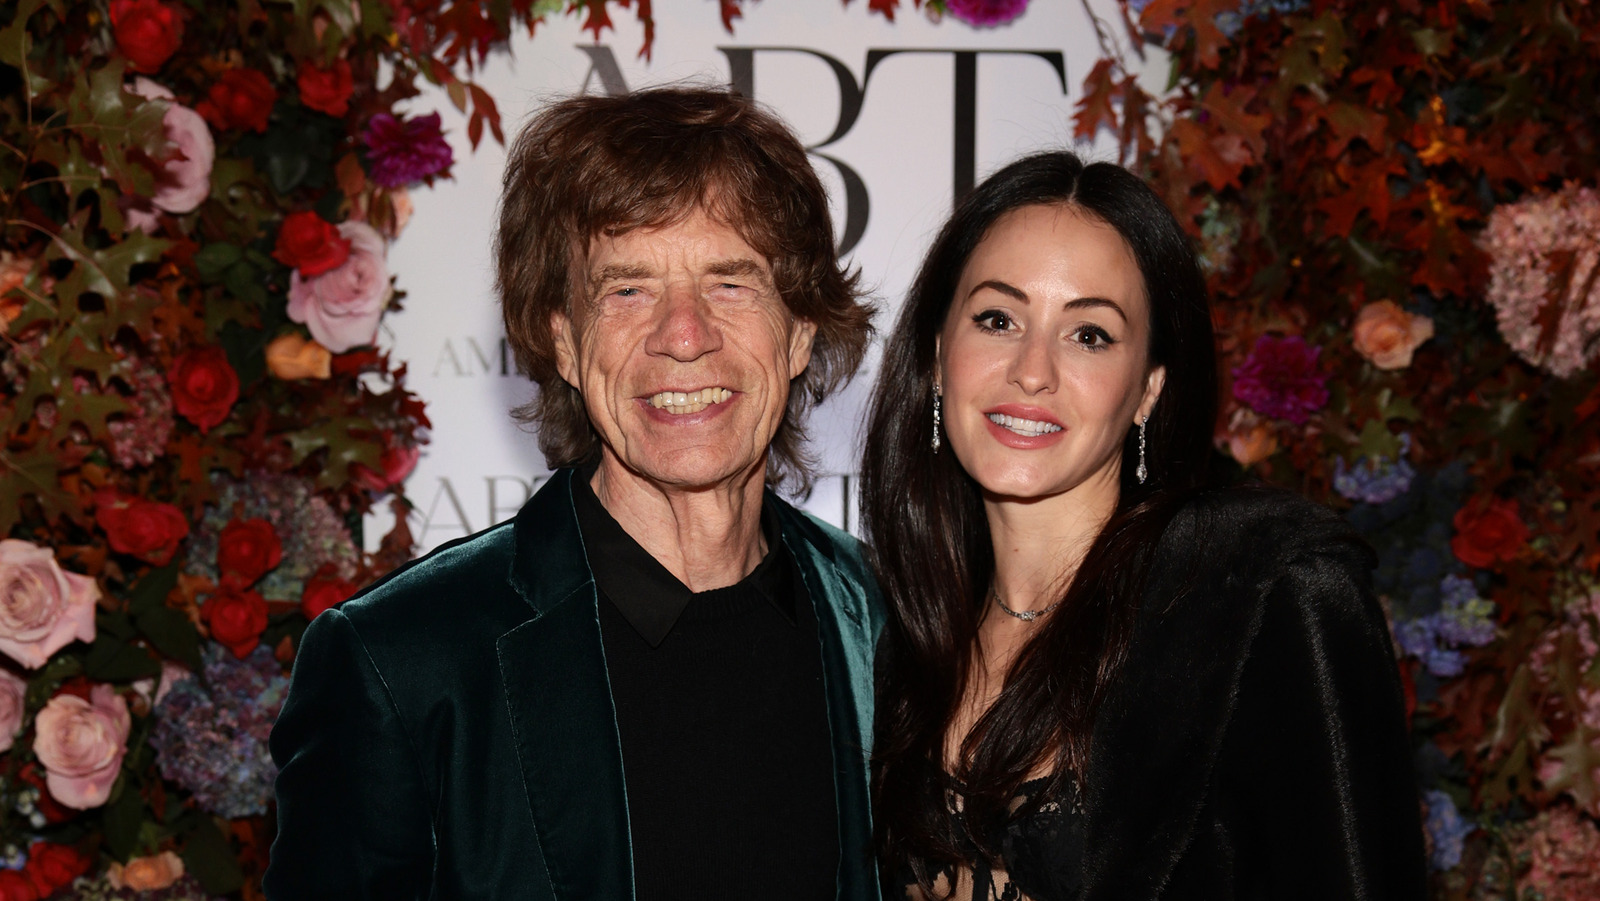 What Mick Jagger's Relationship With Melanie Hamrick Is Like ...